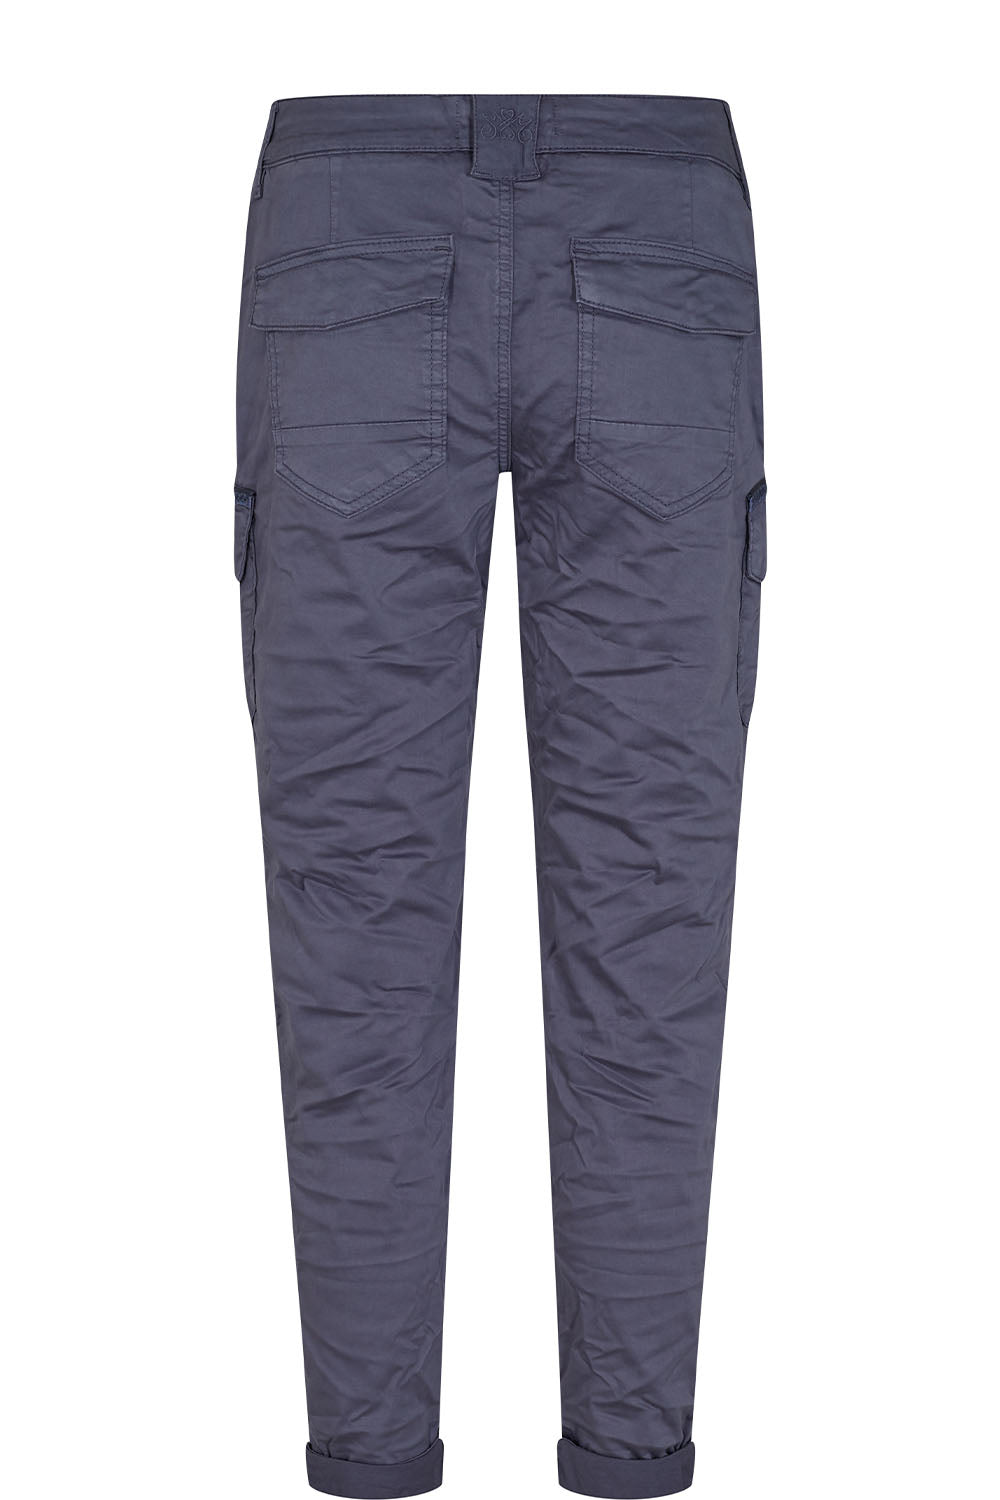 Mos Mosh Camille Cargo Fall Pant Mm140900